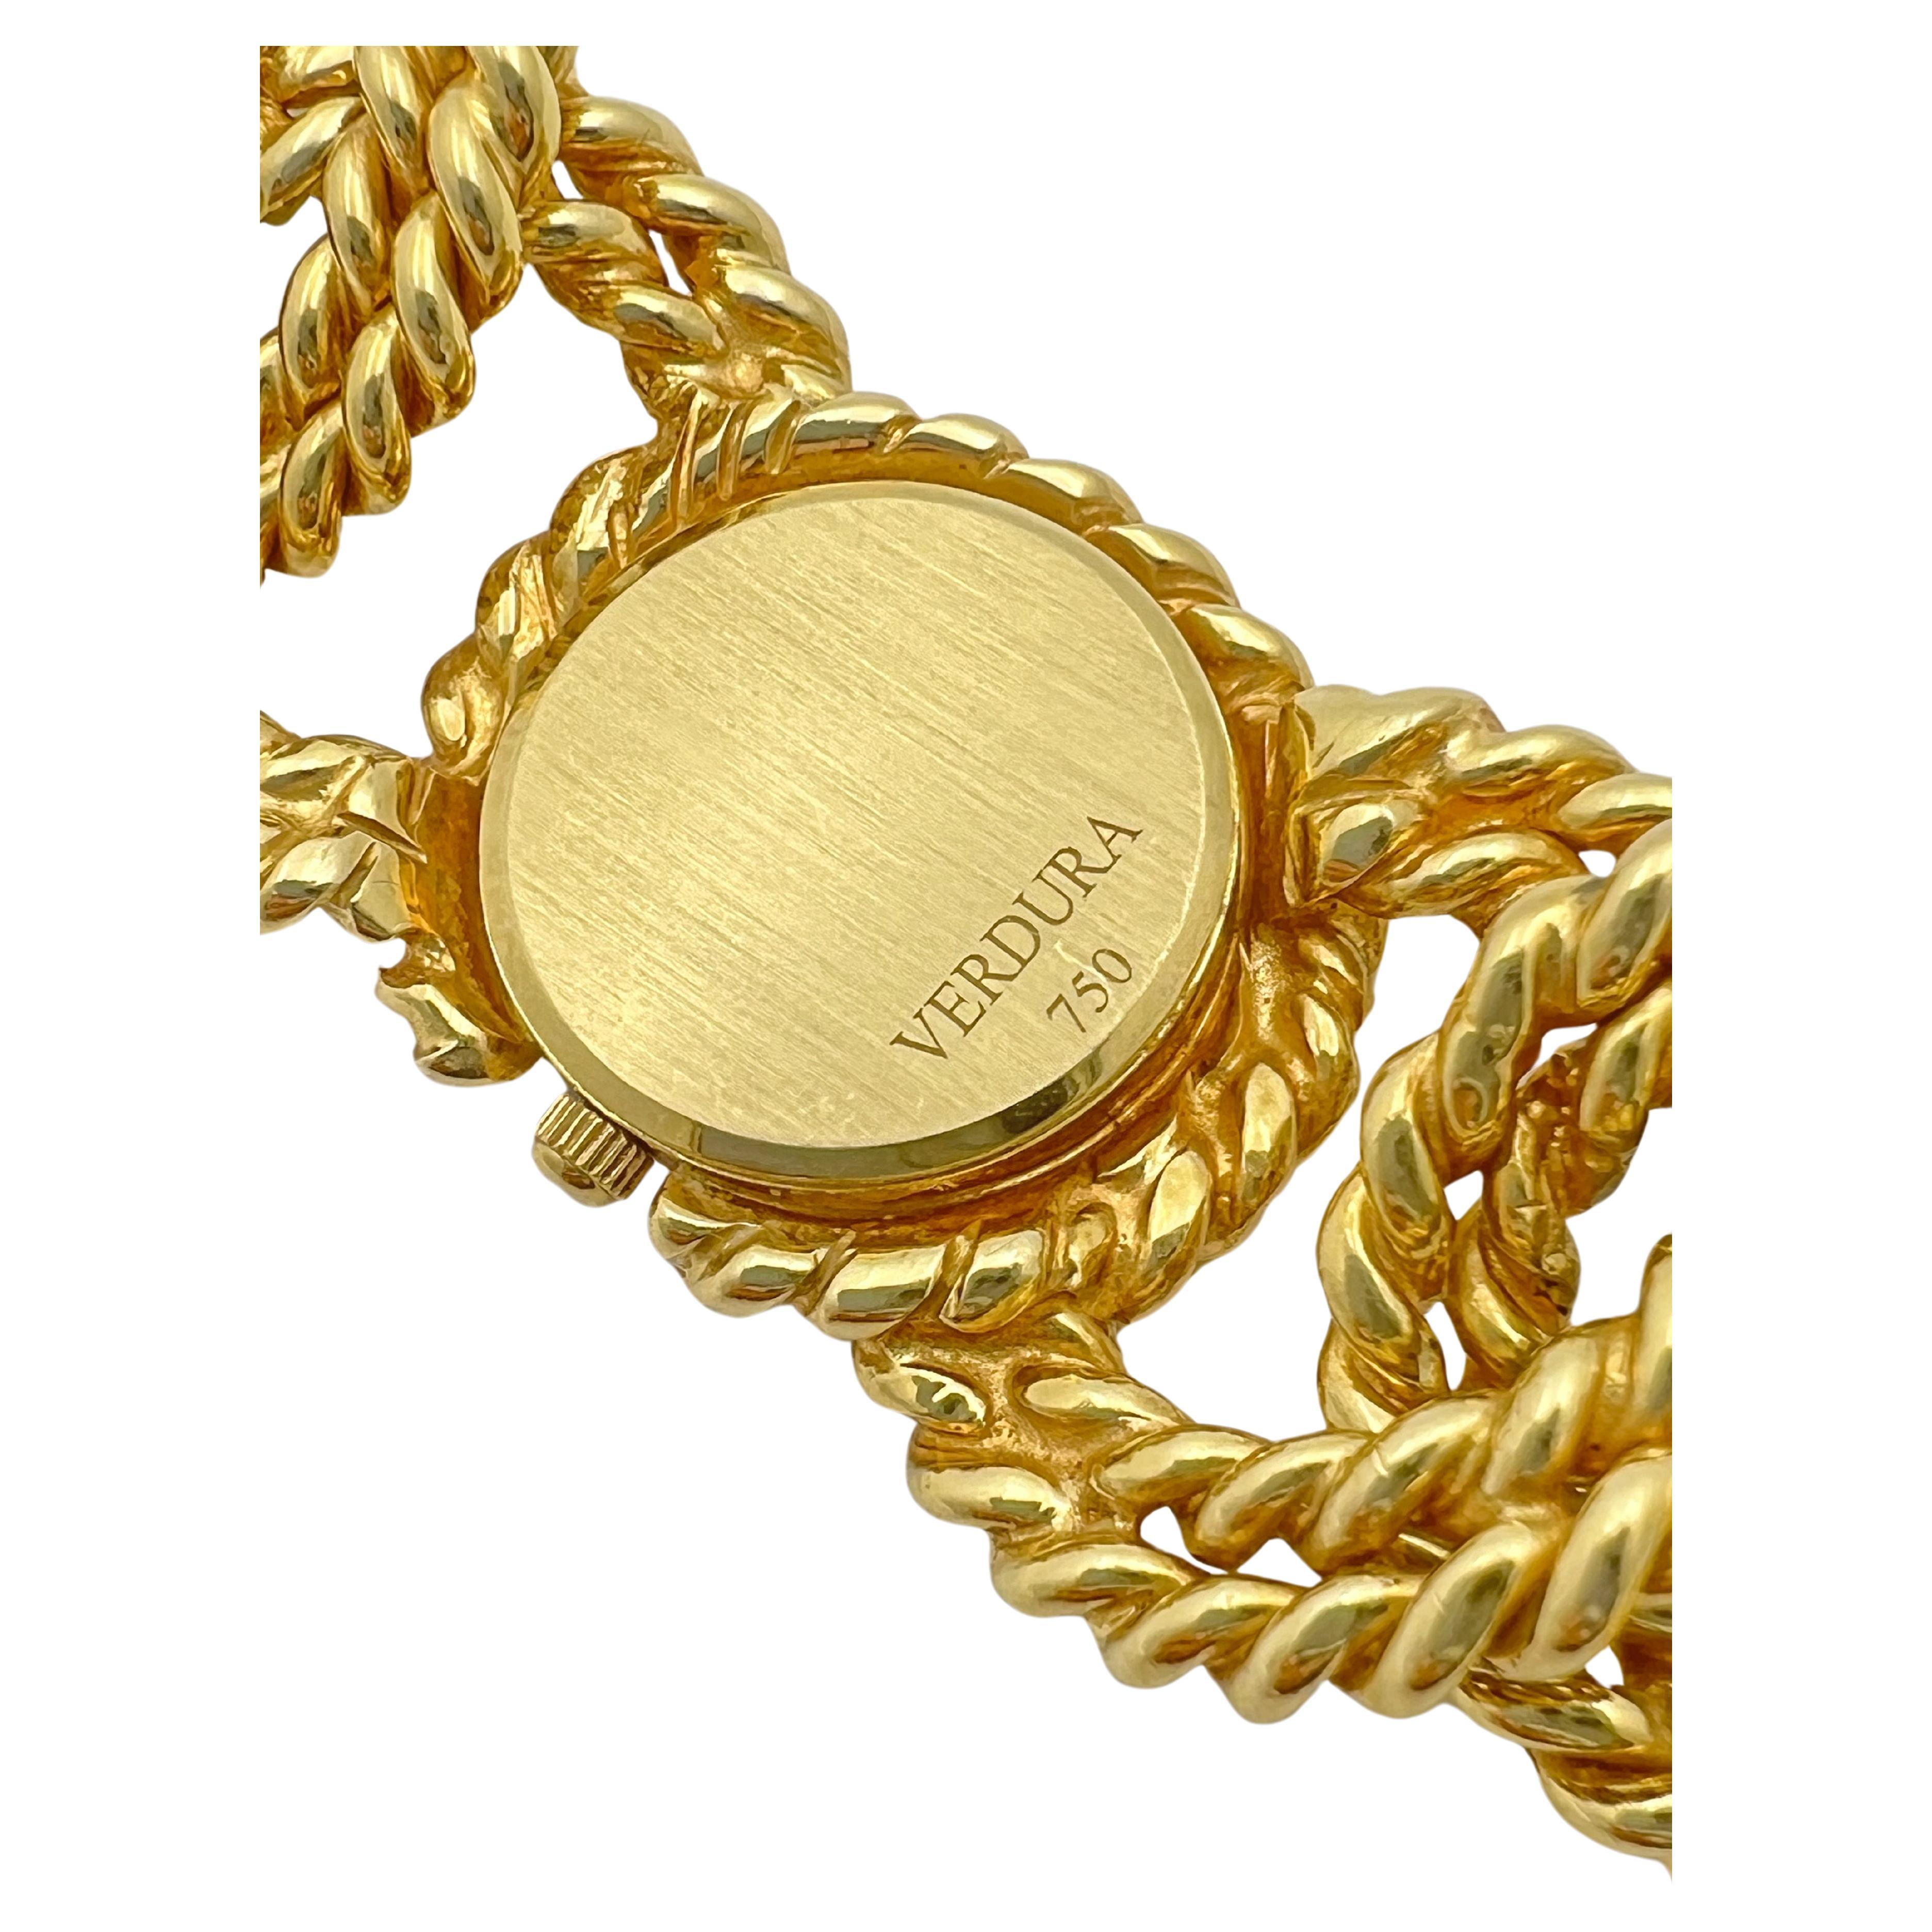 Verdura 18k Yellow Gold Rope Link Bracelet Watch In Excellent Condition For Sale In Palm Beach, FL